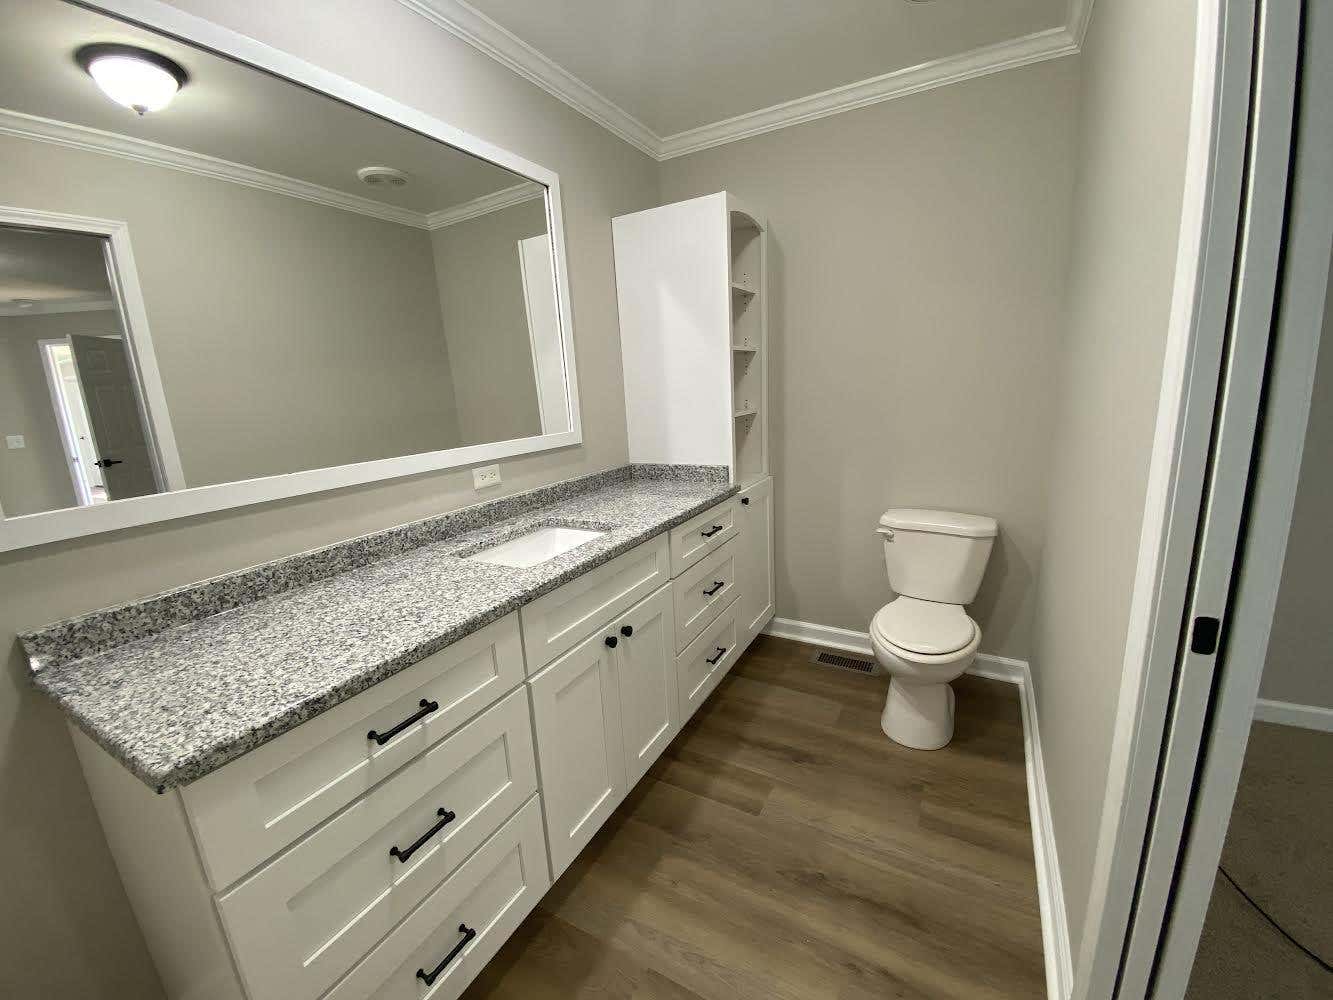 White Freestanding Bathroom Vanities with black pulls, marble countertop, one large mirror and White WaterSense Elongated Toilet